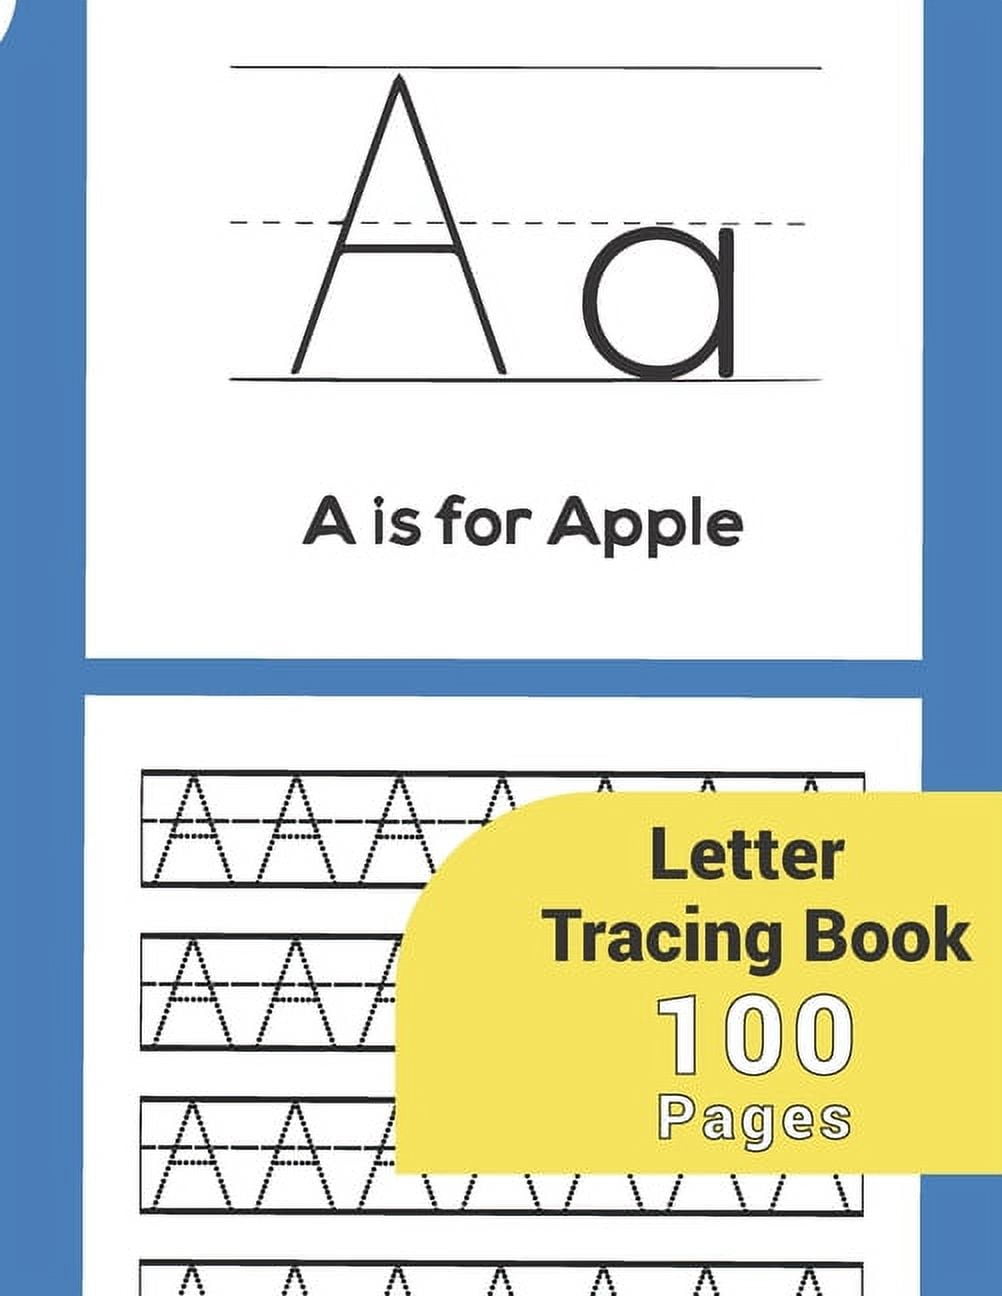 Letter Tracing: Letter Tracing Paper-Perfect For Kids Letter Tracing Books Preschoolers 3-5 Kindergarten Toddlers Boys Girls Kida Age 3-5 With Hand Lettered Design Tracing Paper [Book]